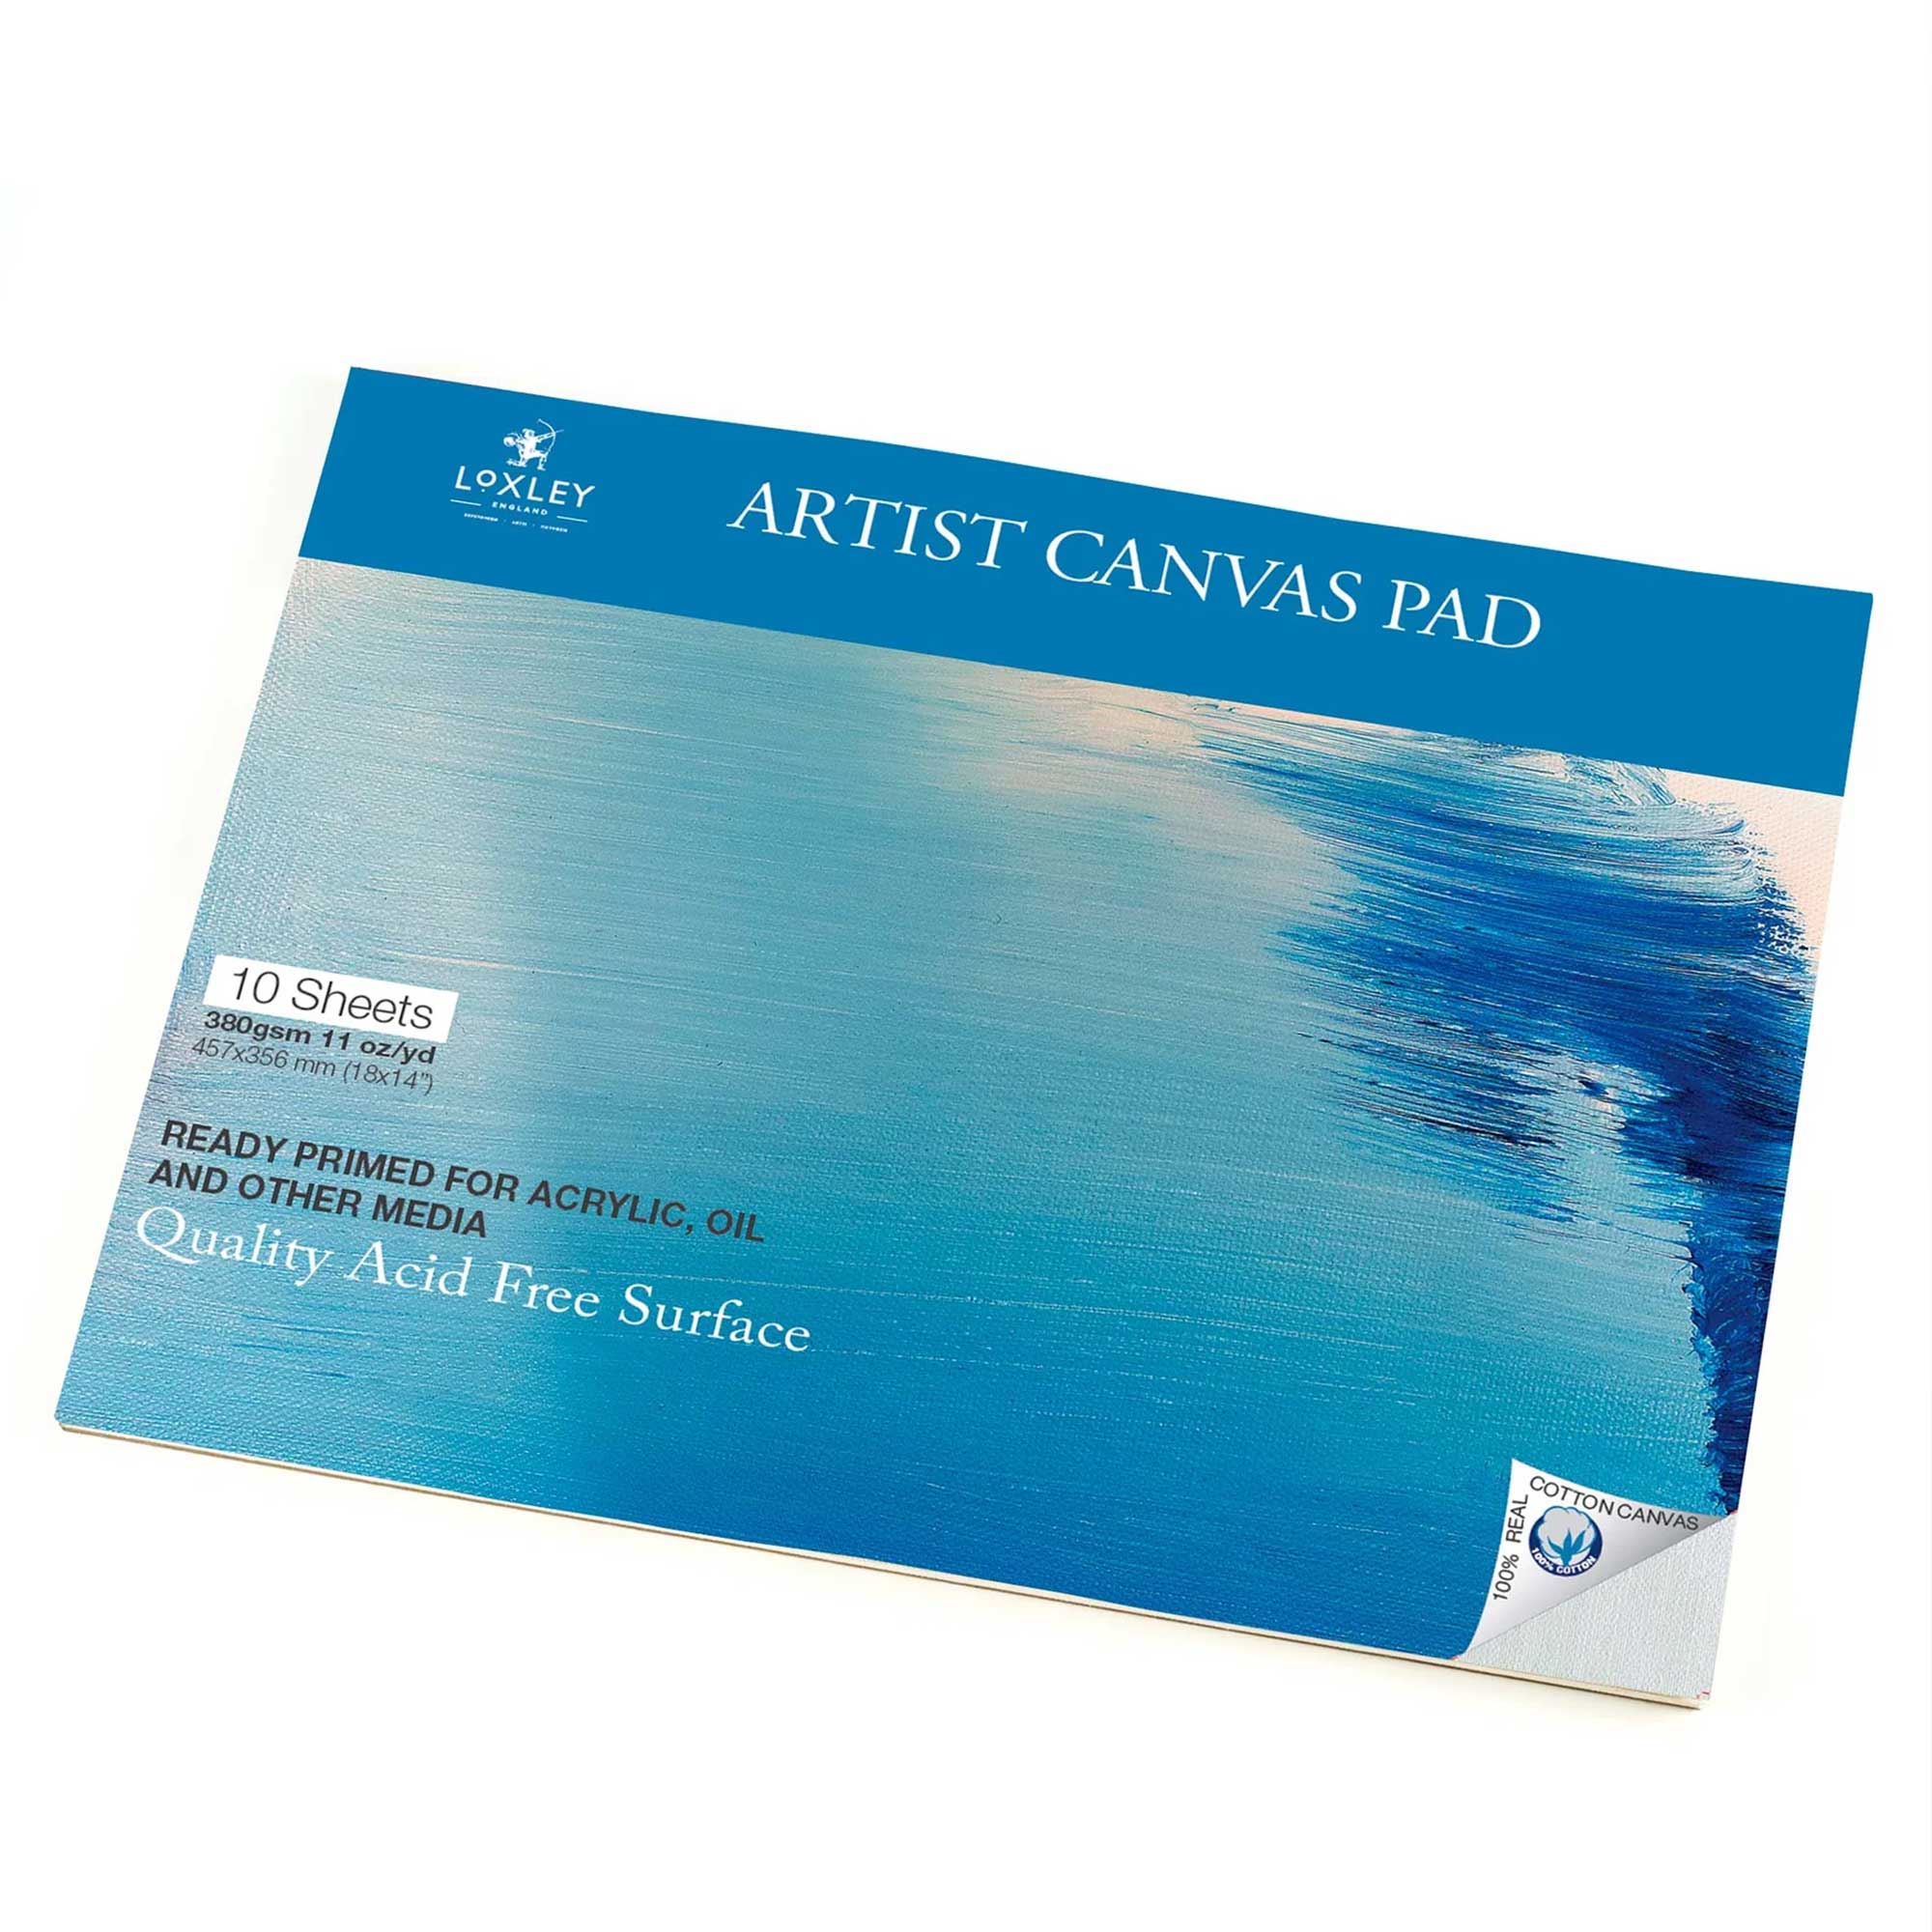 Loxley Artists Canvas Pad